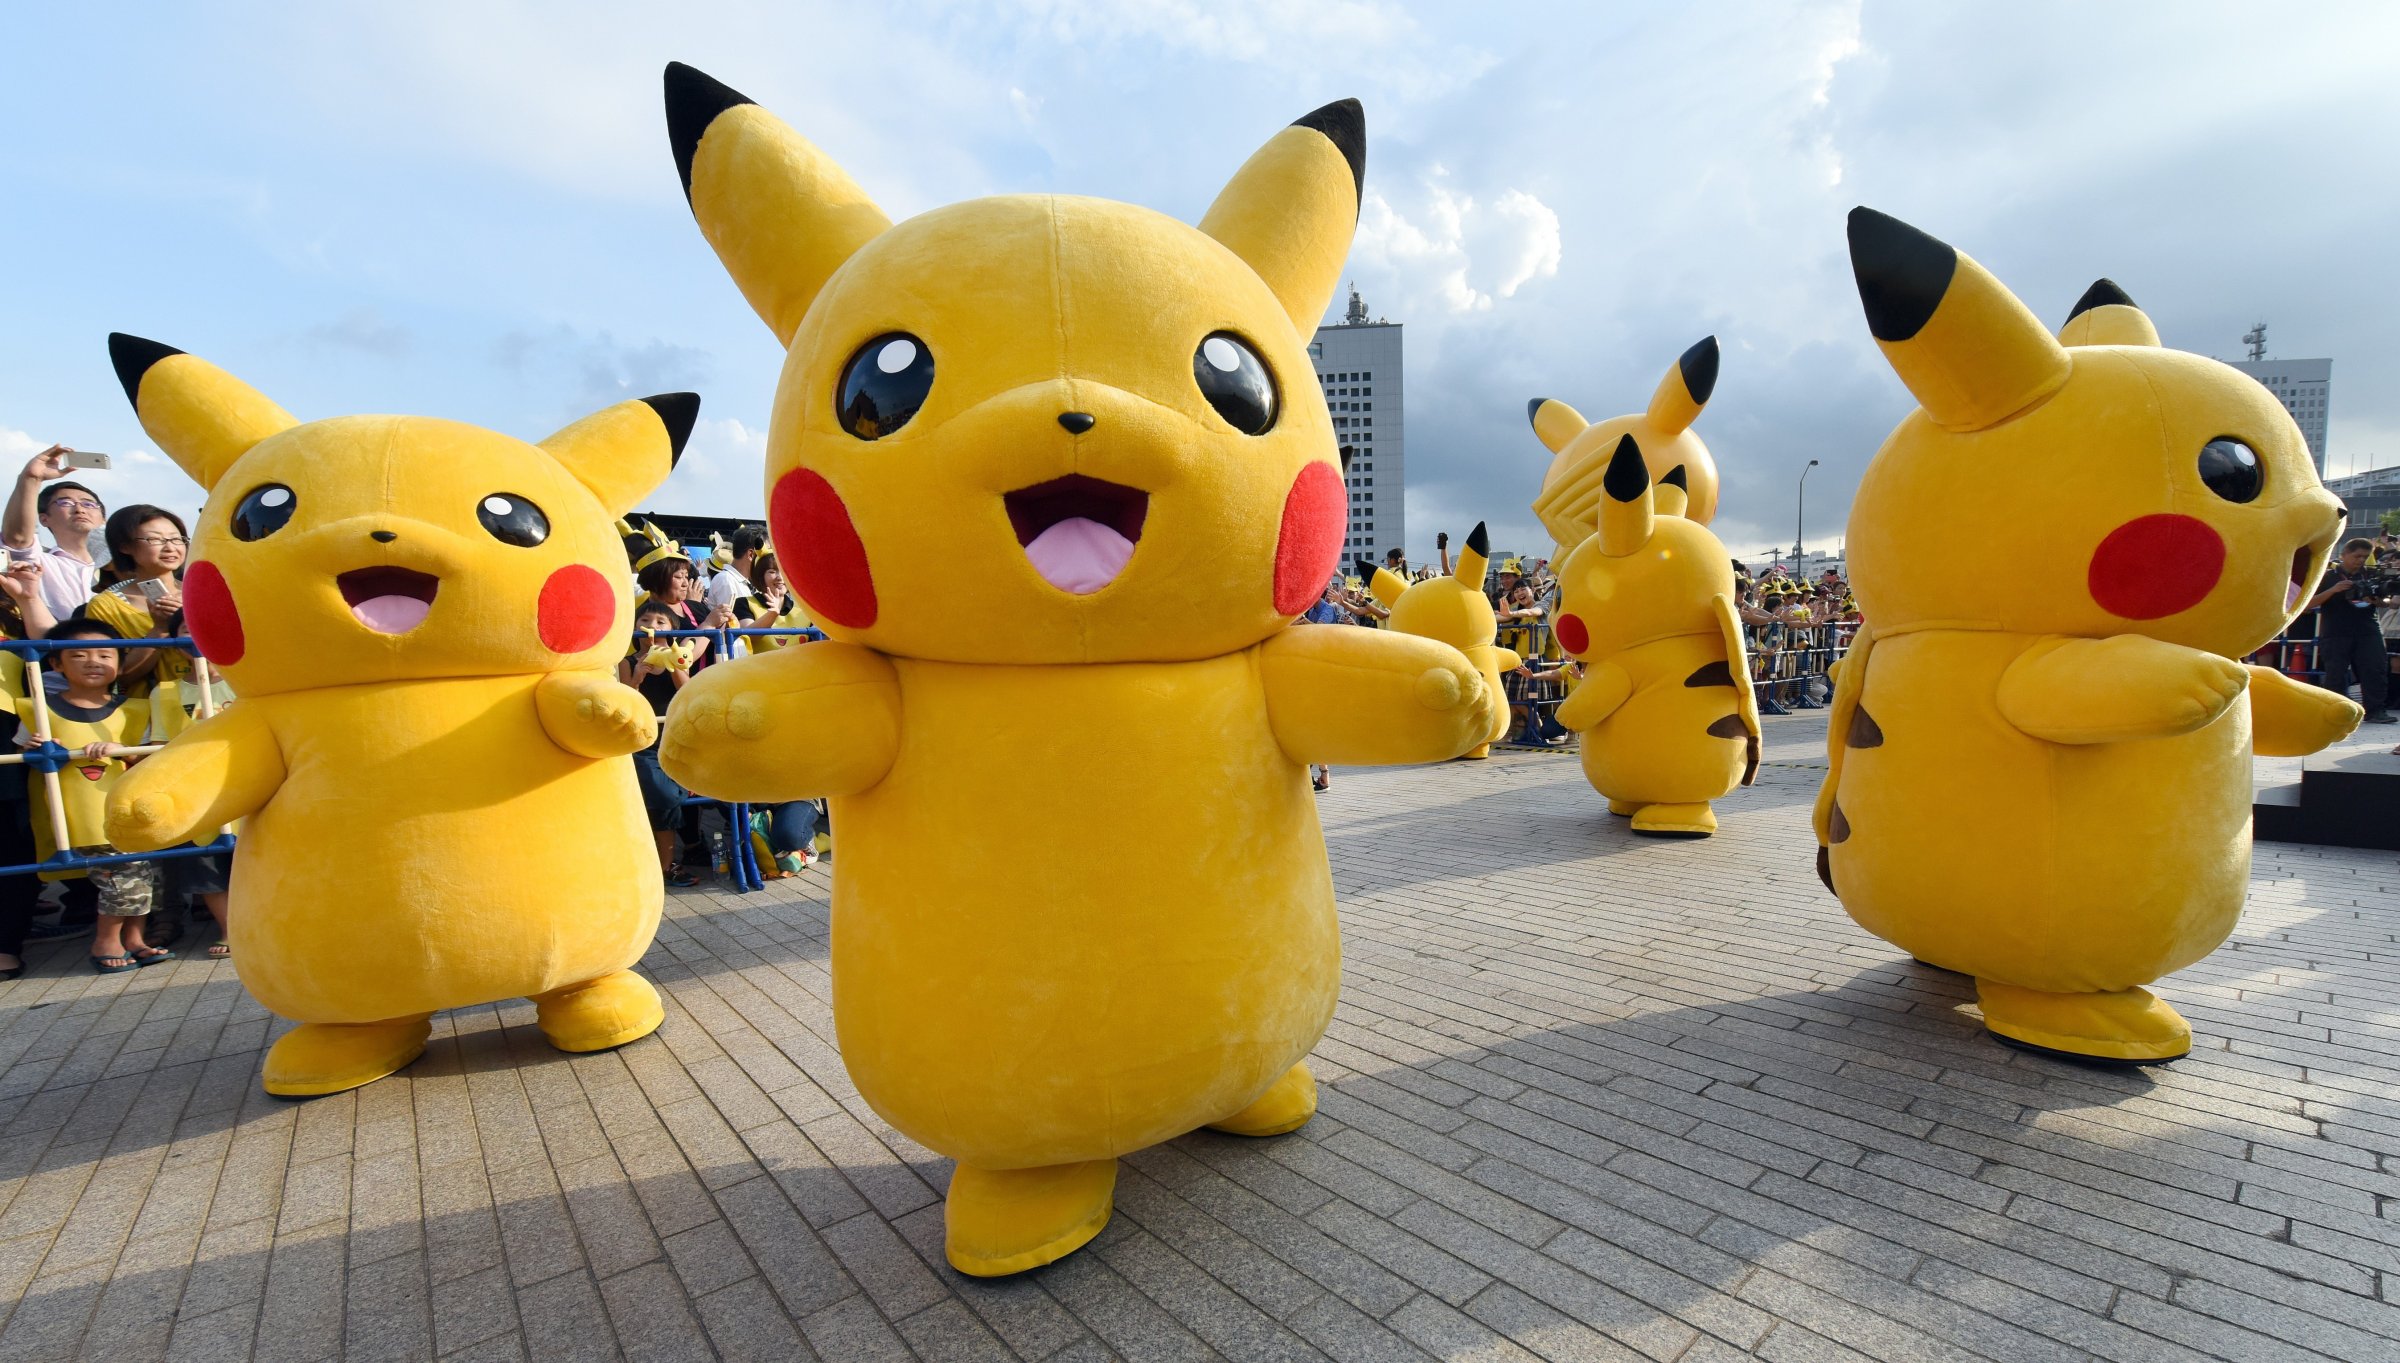 Dozens of people dressed up as Pikachu, the famous character of Nintendo's videogame software Pokemon, dance with fans as the final of a nine-day "Pikachu Outbreak" event takes place to attract summer vacationers in Yokohama, in suburban Tokyo, on August 16, 2015.